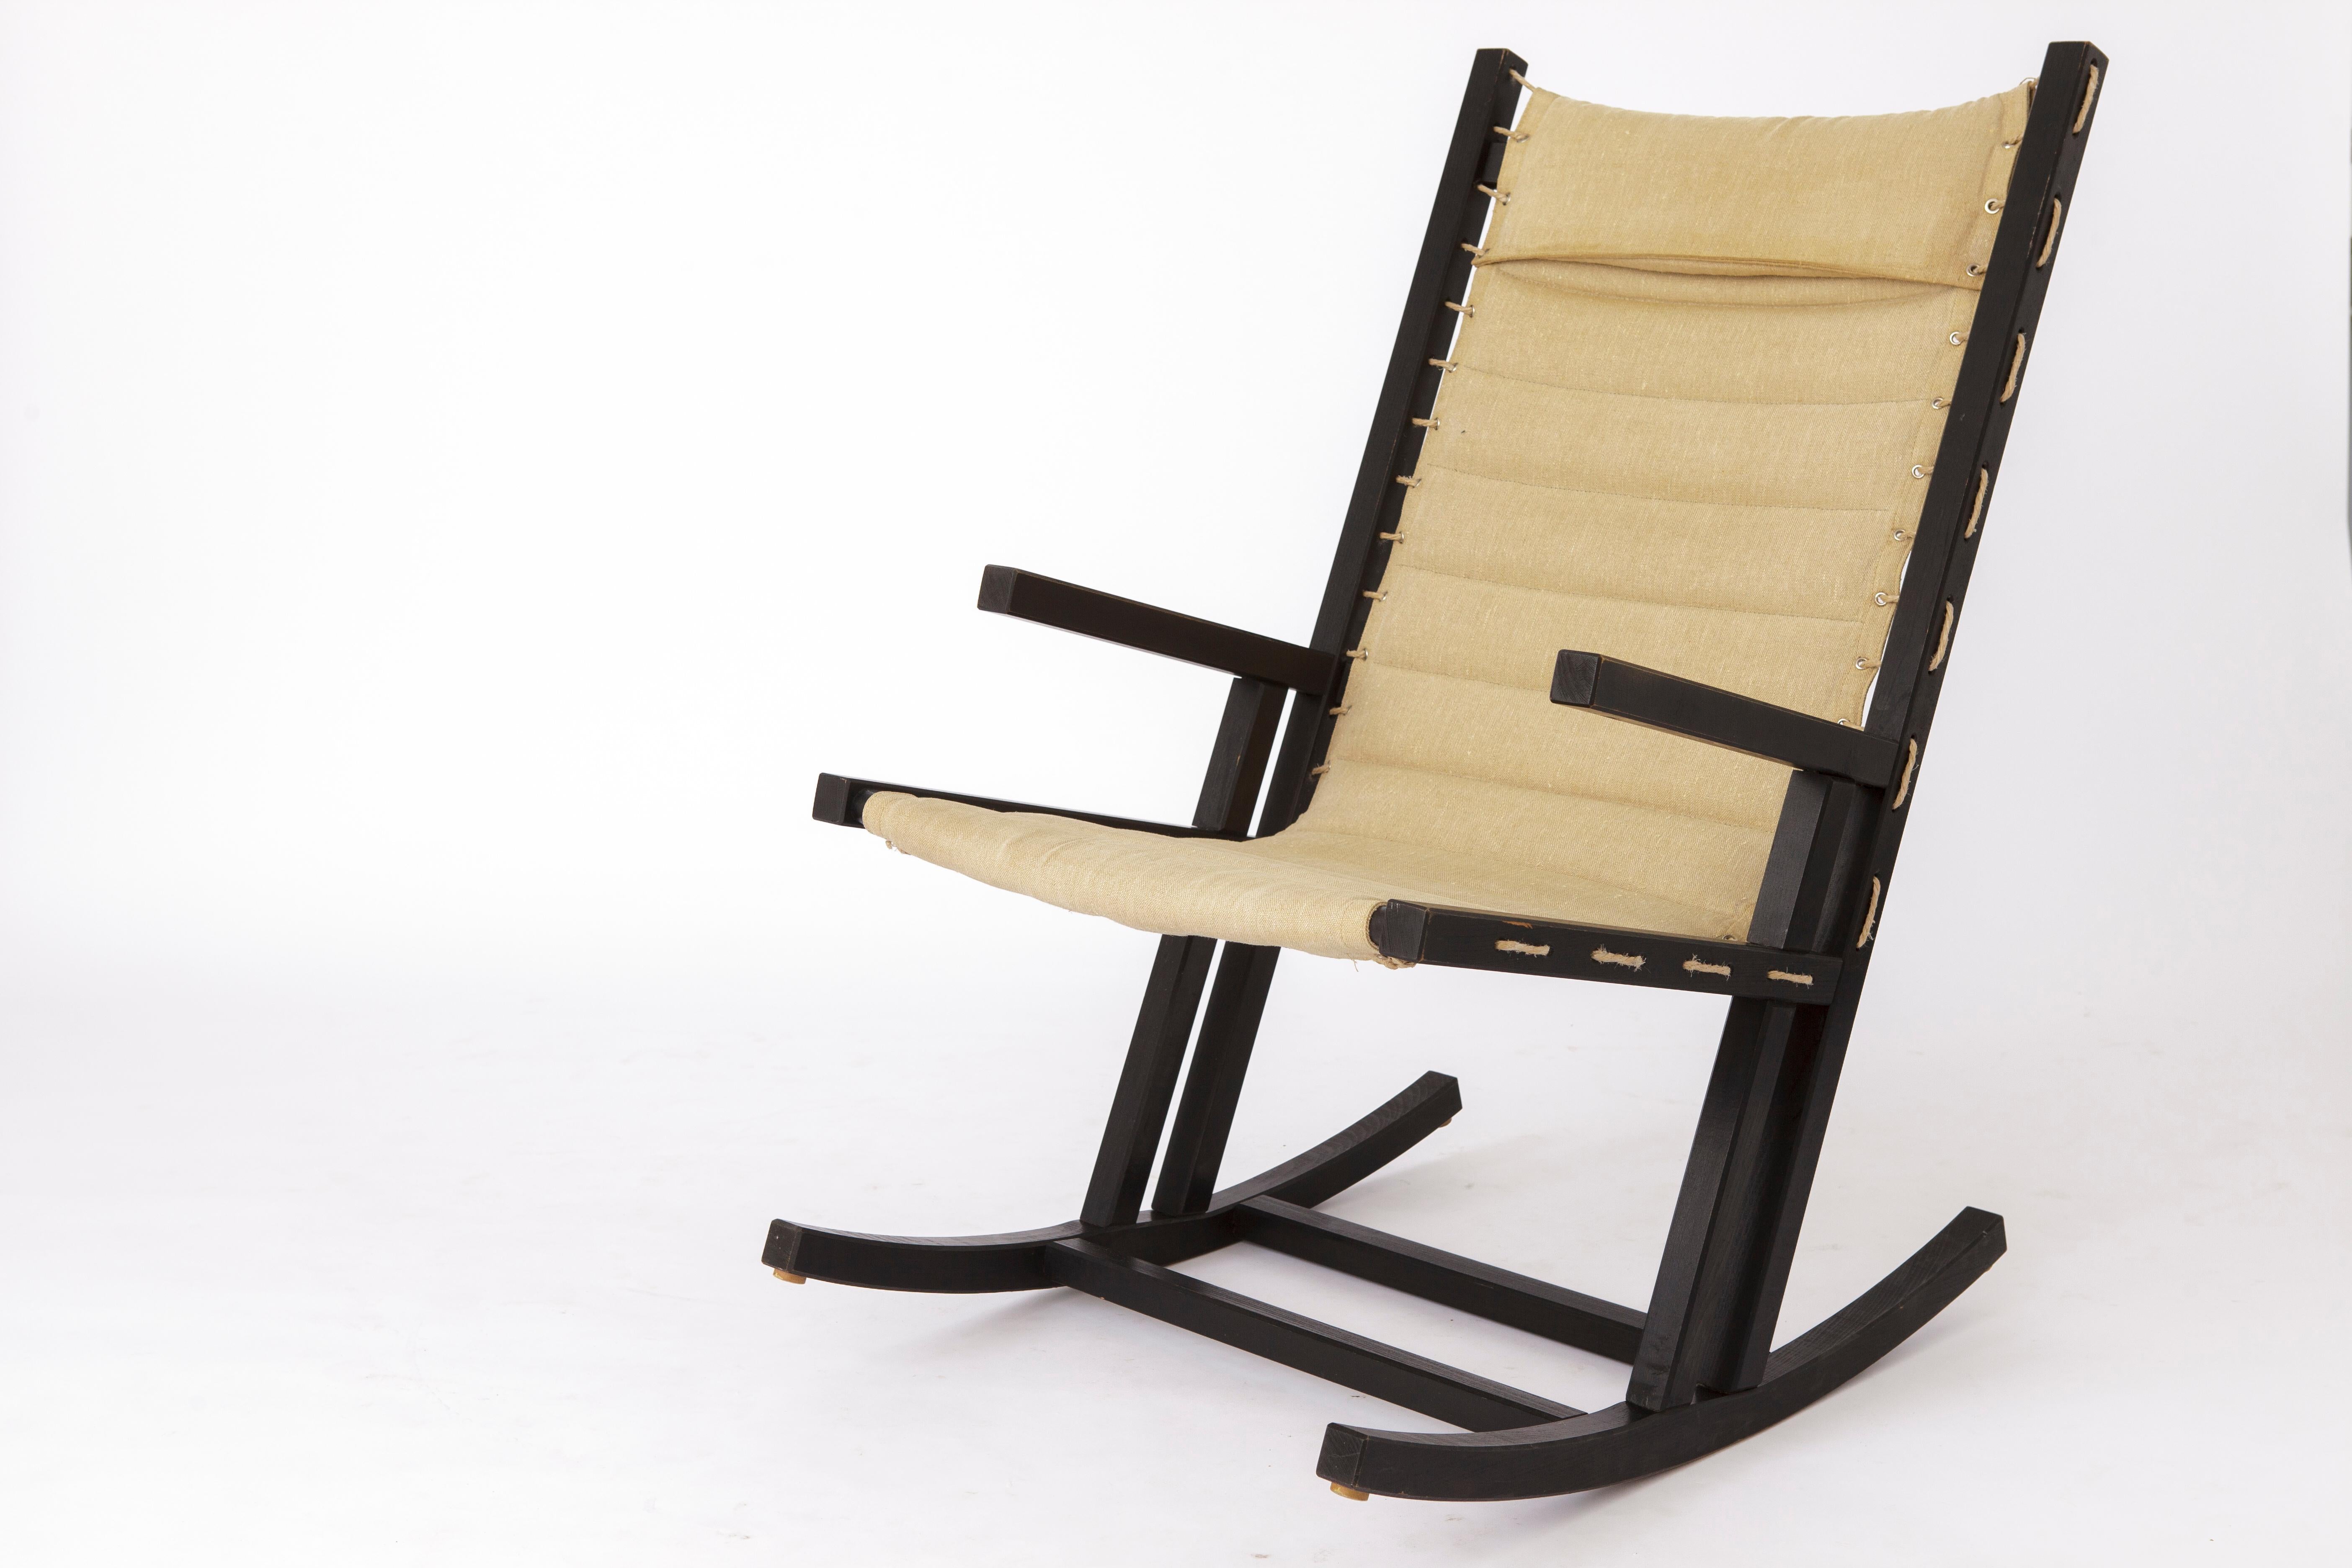 Minimalistic Rocking chair from the 1960s with cotton cover. 
Manufacturer: Casala, Germany 

Good vintage condition. Black painted beech wood frame in stable condition. 
No loose joints. Firm stand. No creaking.
Beige cotton cover was